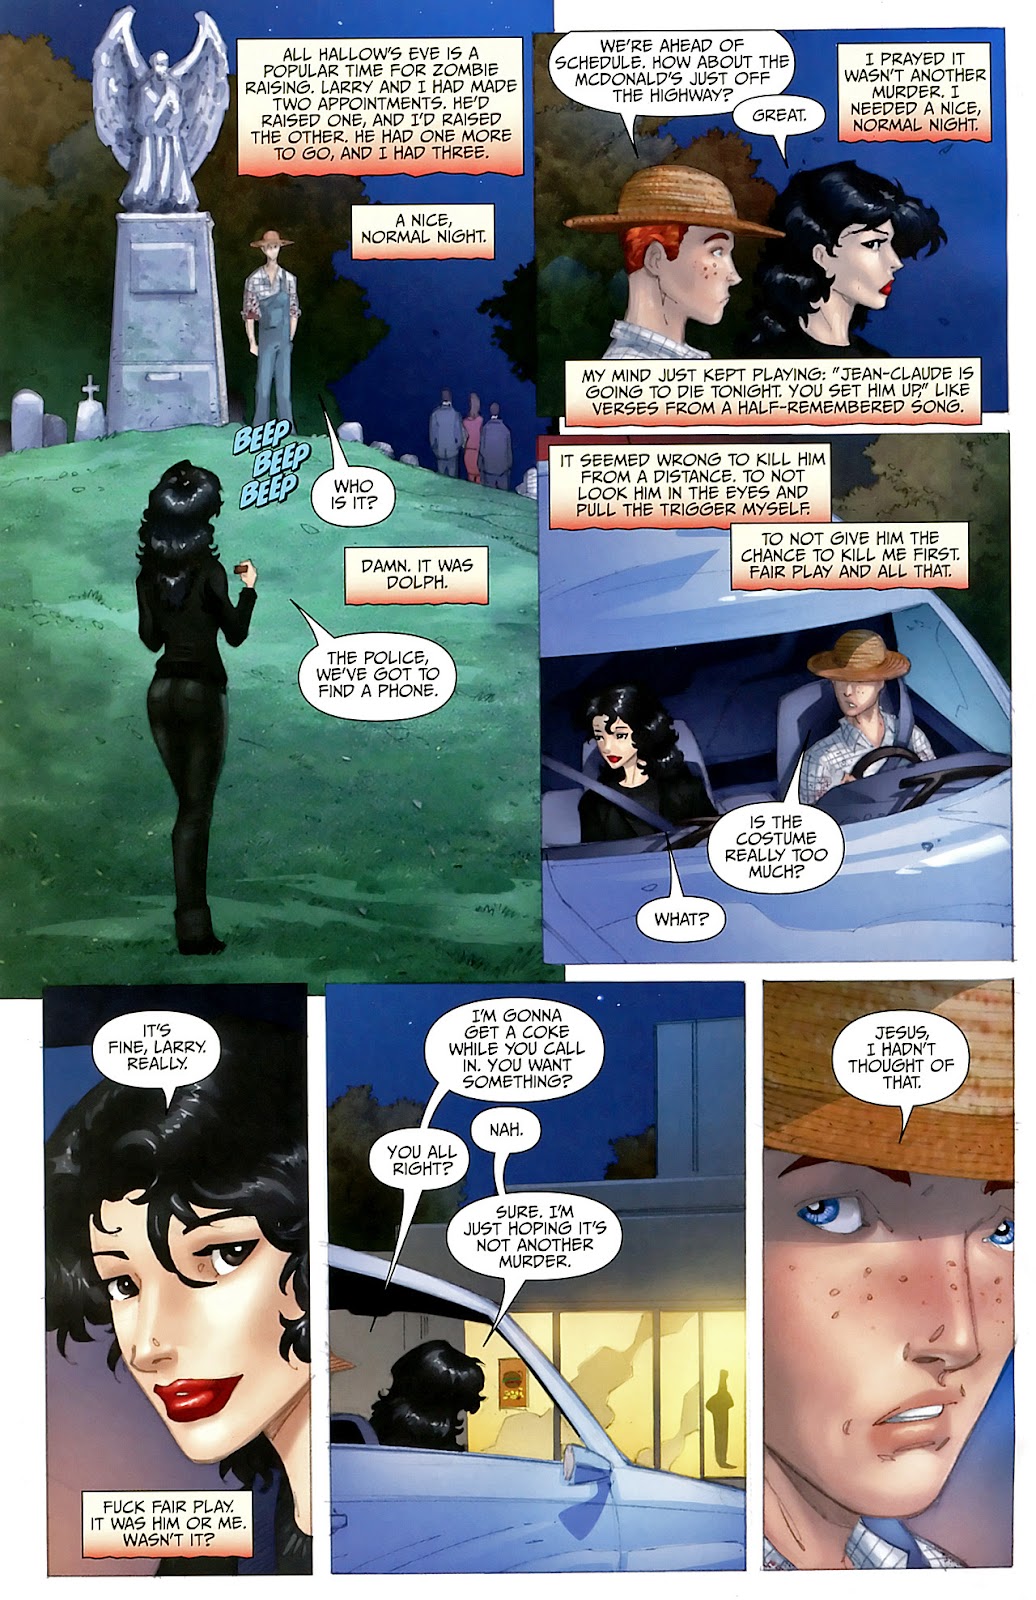 Anita Blake, Vampire Hunter: Circus of the Damned - The Scoundrel issue 4 - Page 3